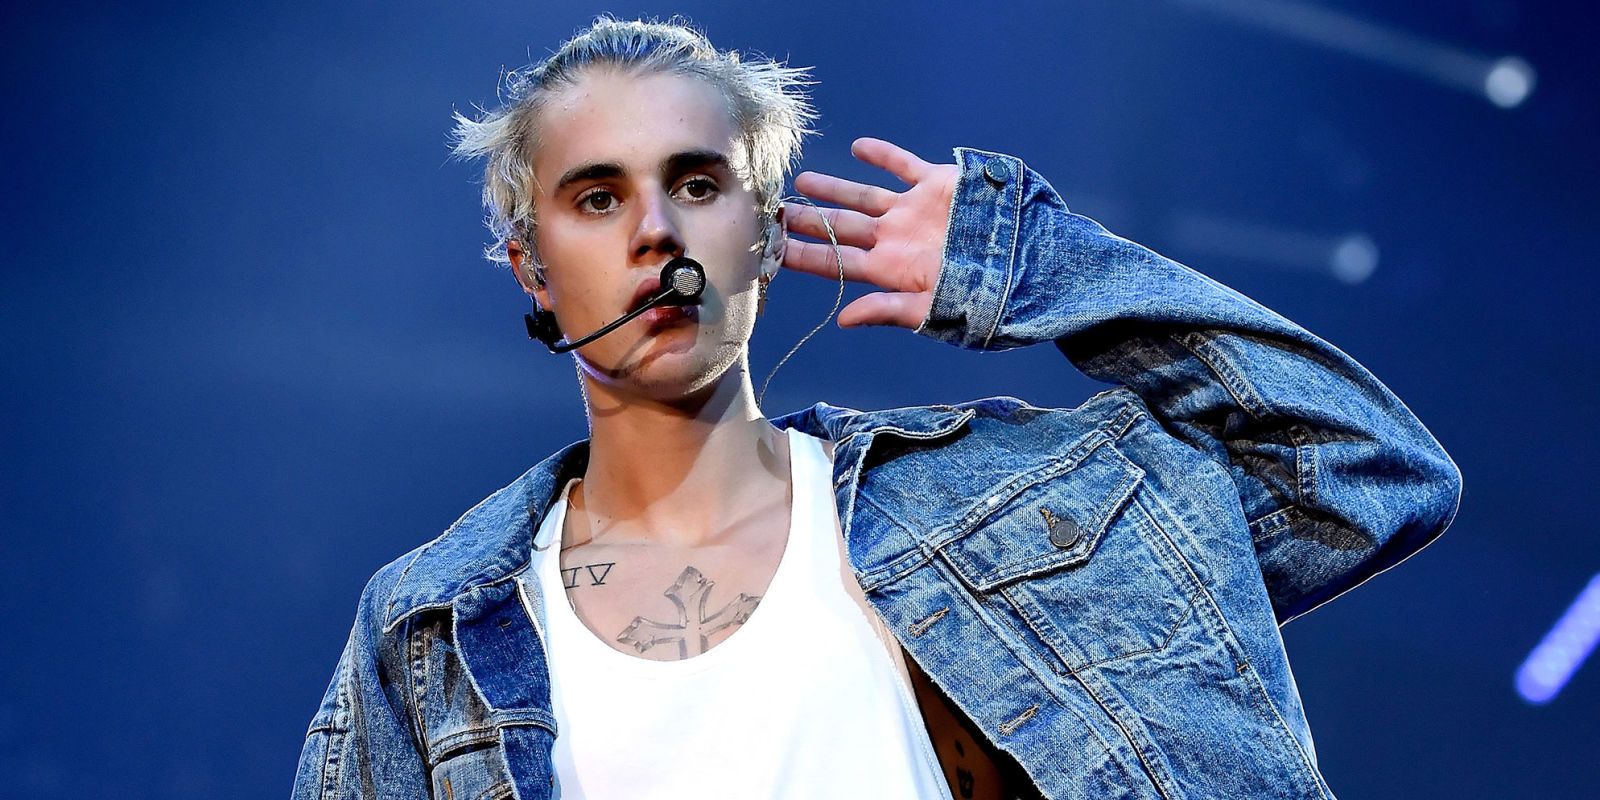 Justin Bieber's Wedding Ring Goes With His Lavish New Watch | Life & Style